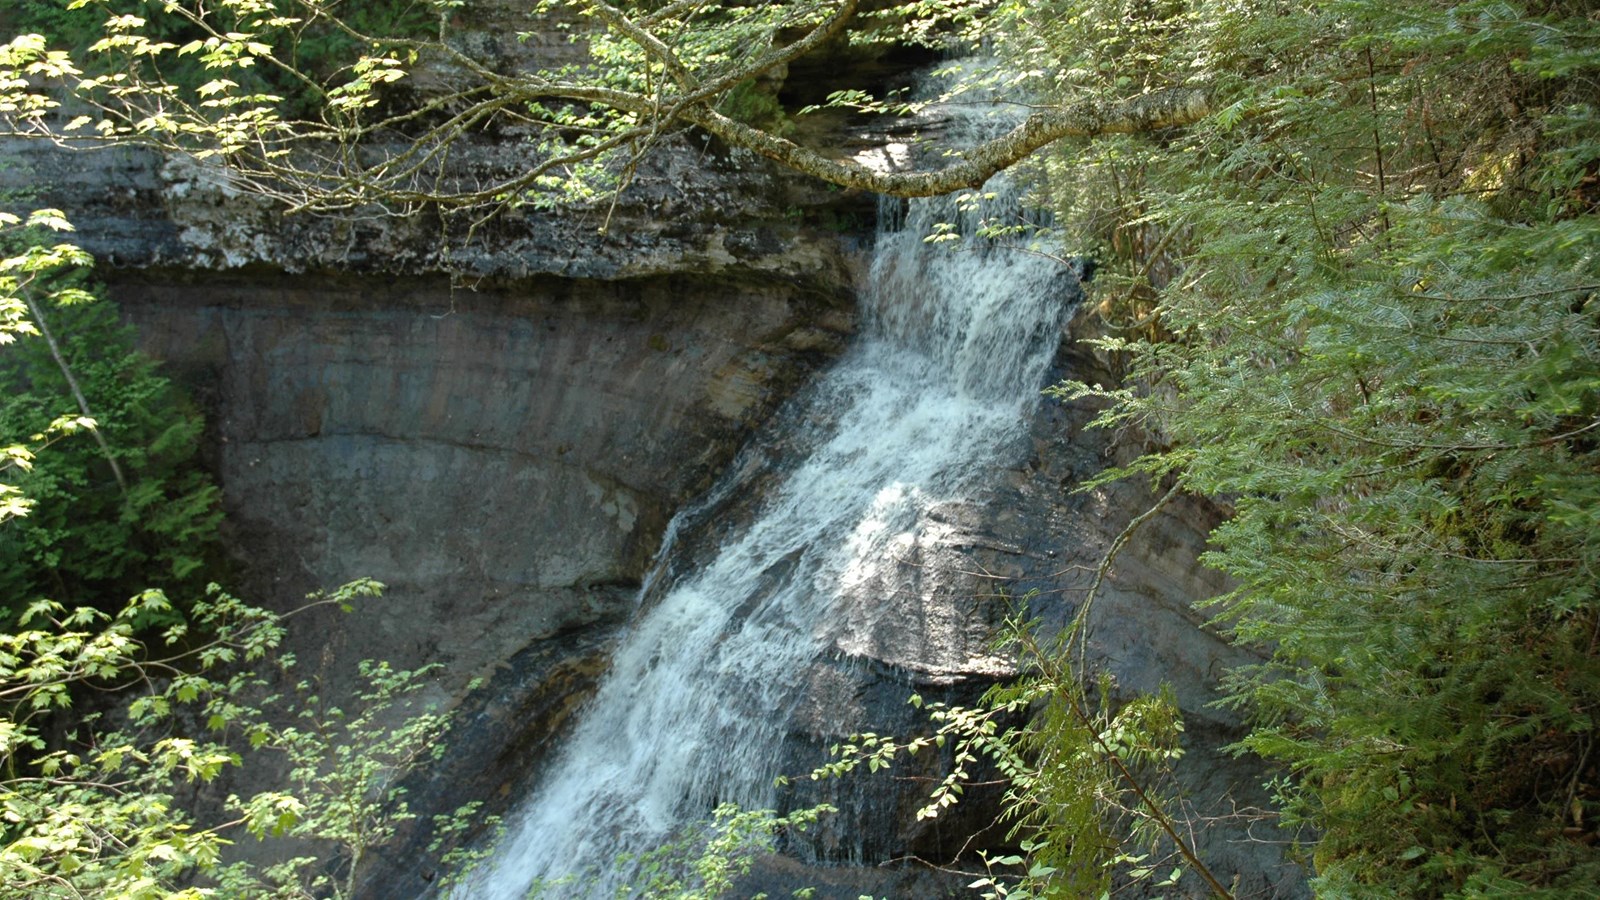 Chapel Falls flows along the angled cliff slope from top to bottom